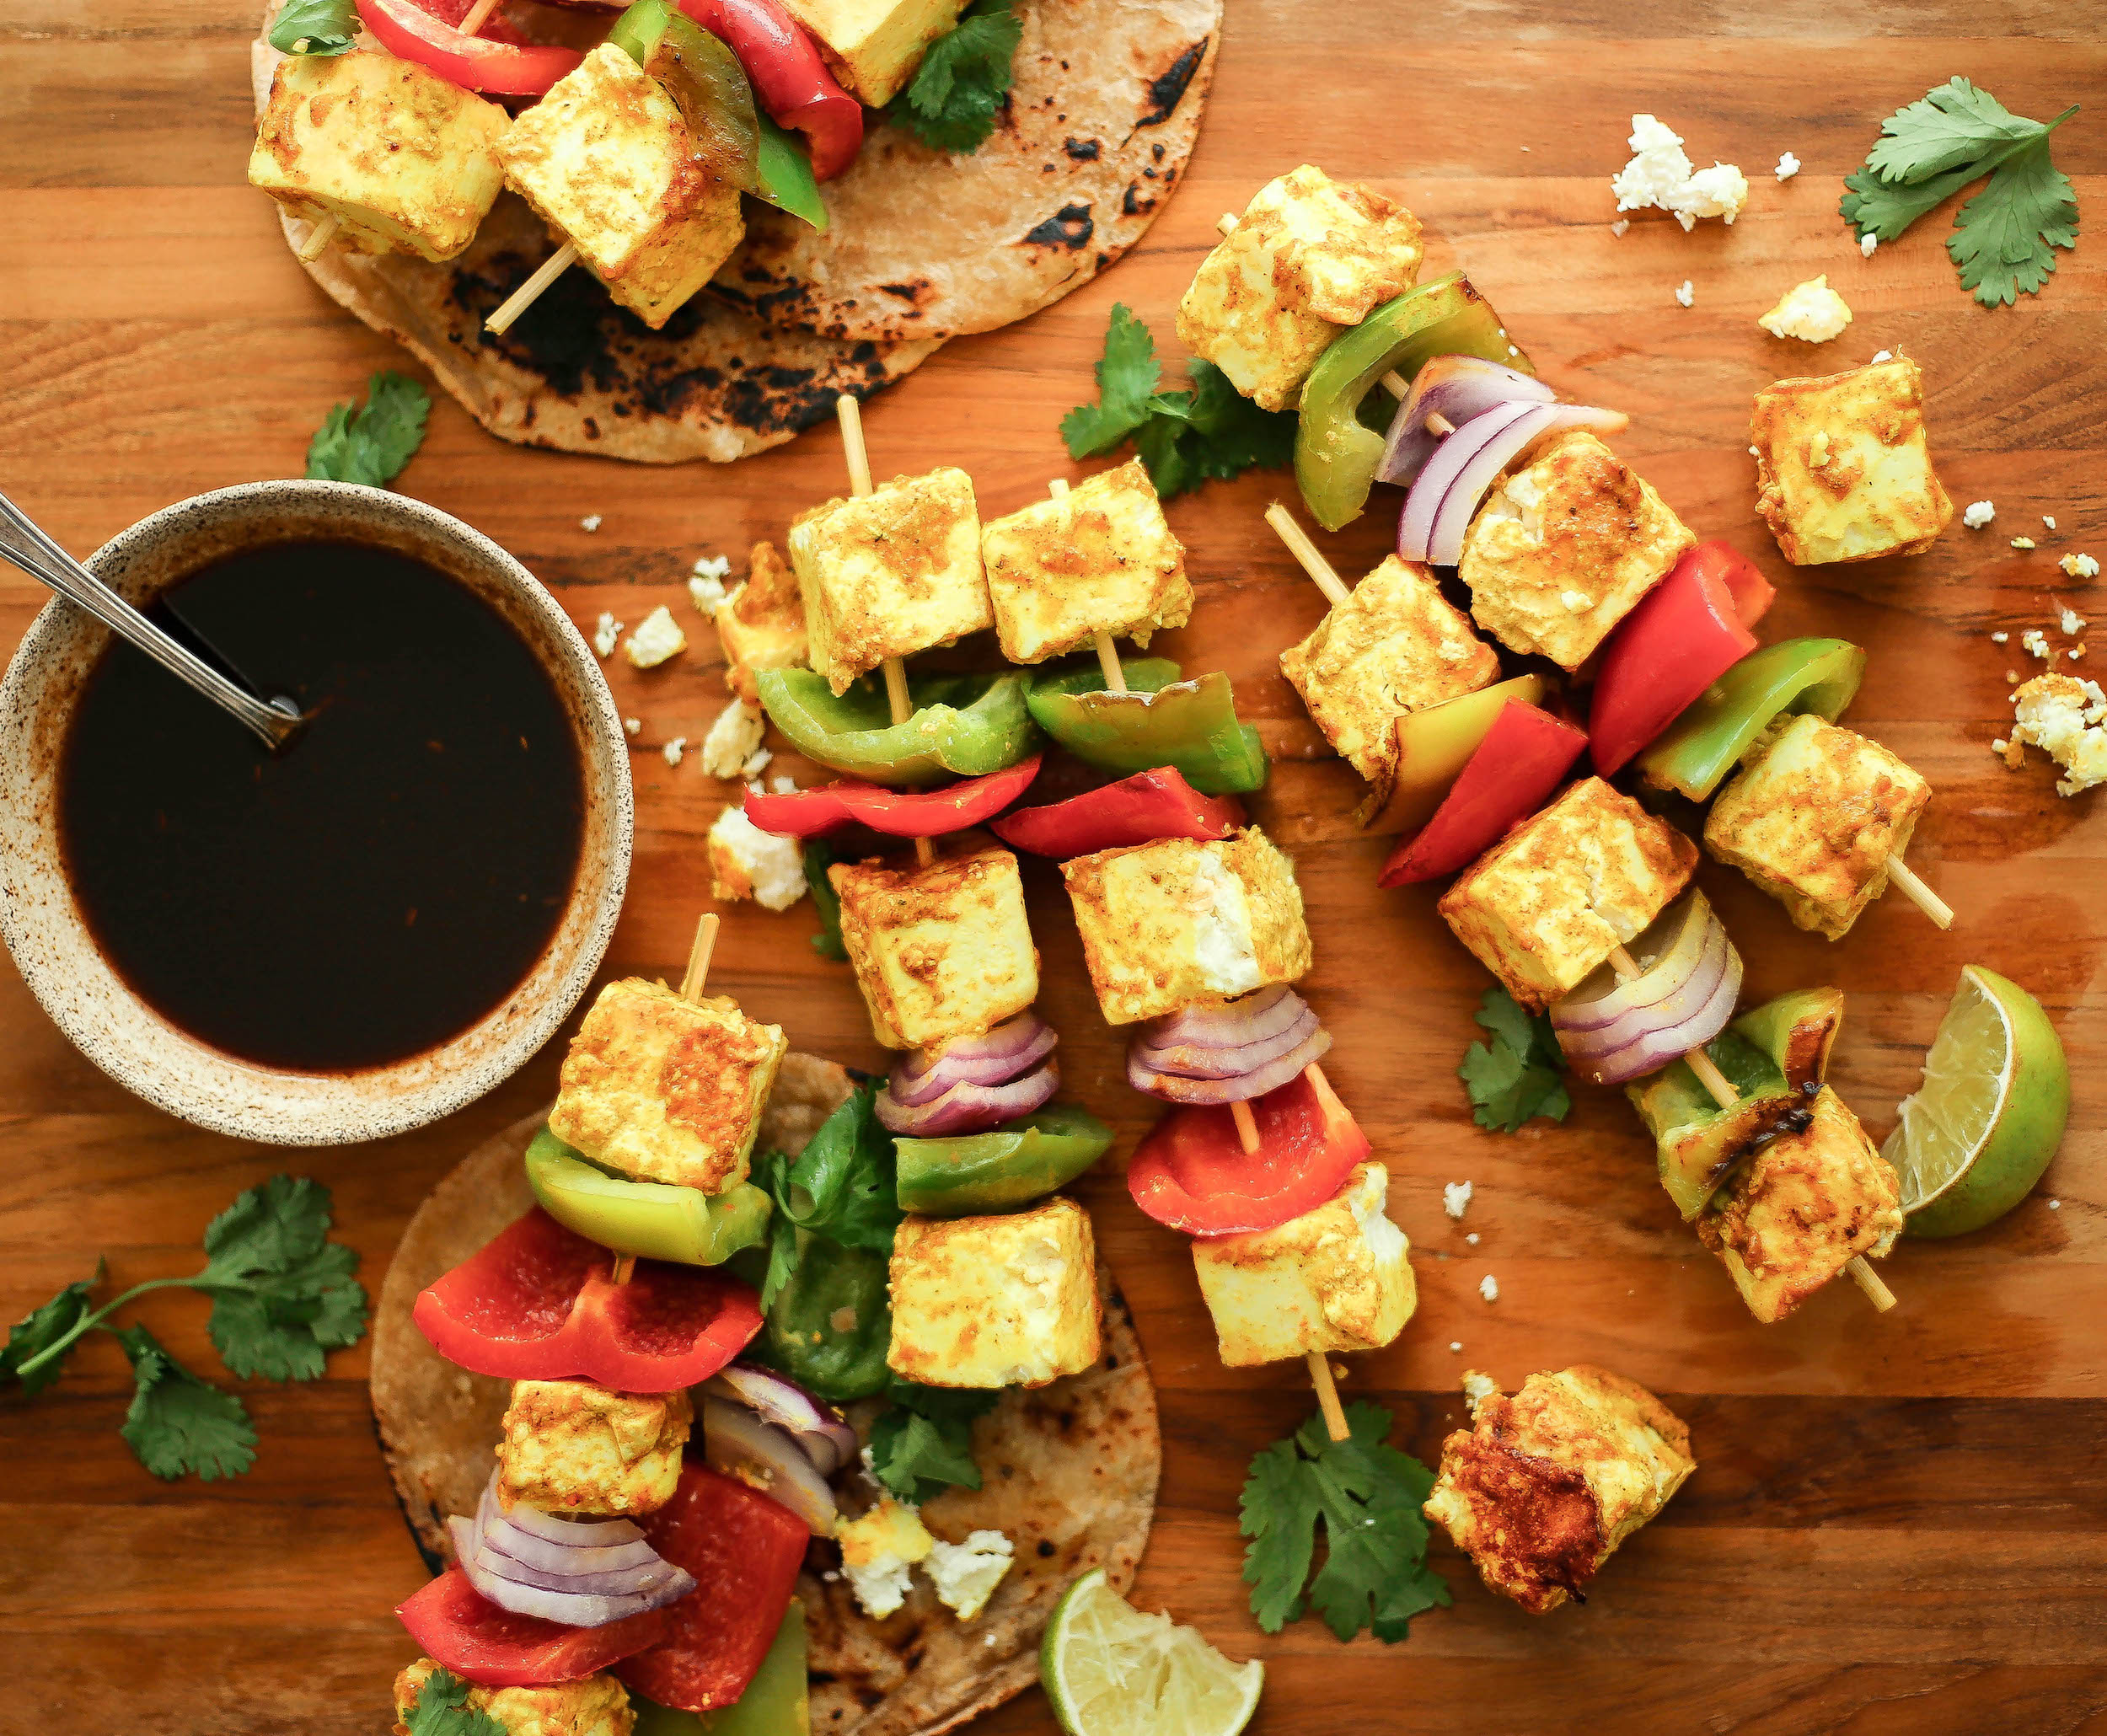 paneer tikka kebabs are the vegetarian side dish to bring to all your summer barbecues